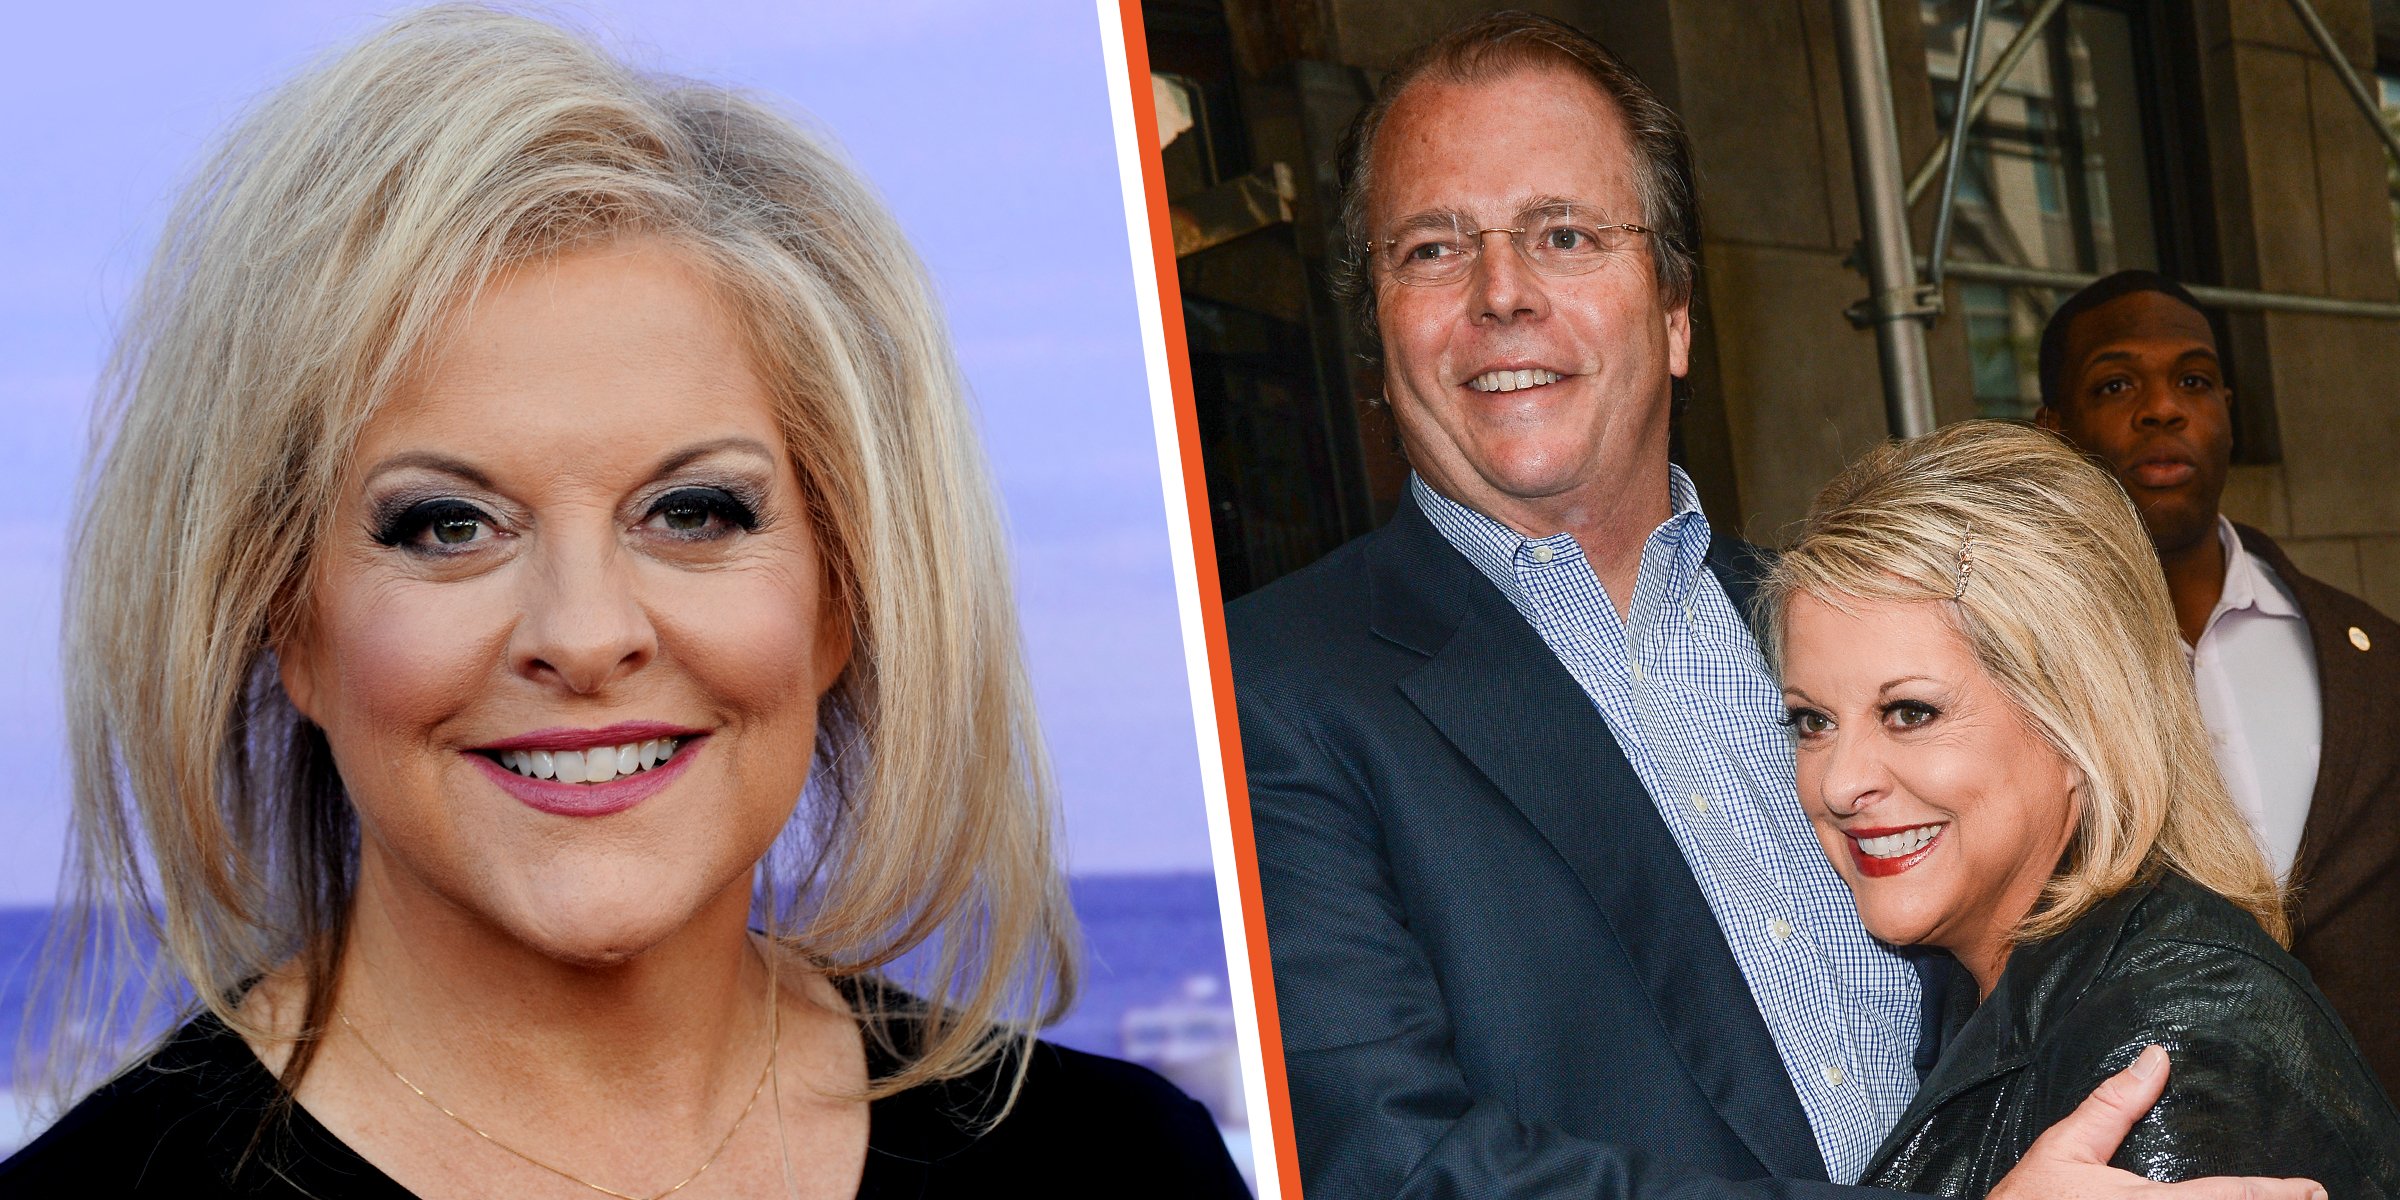 Nancy Grace and David Linch. | Source: Getty Images